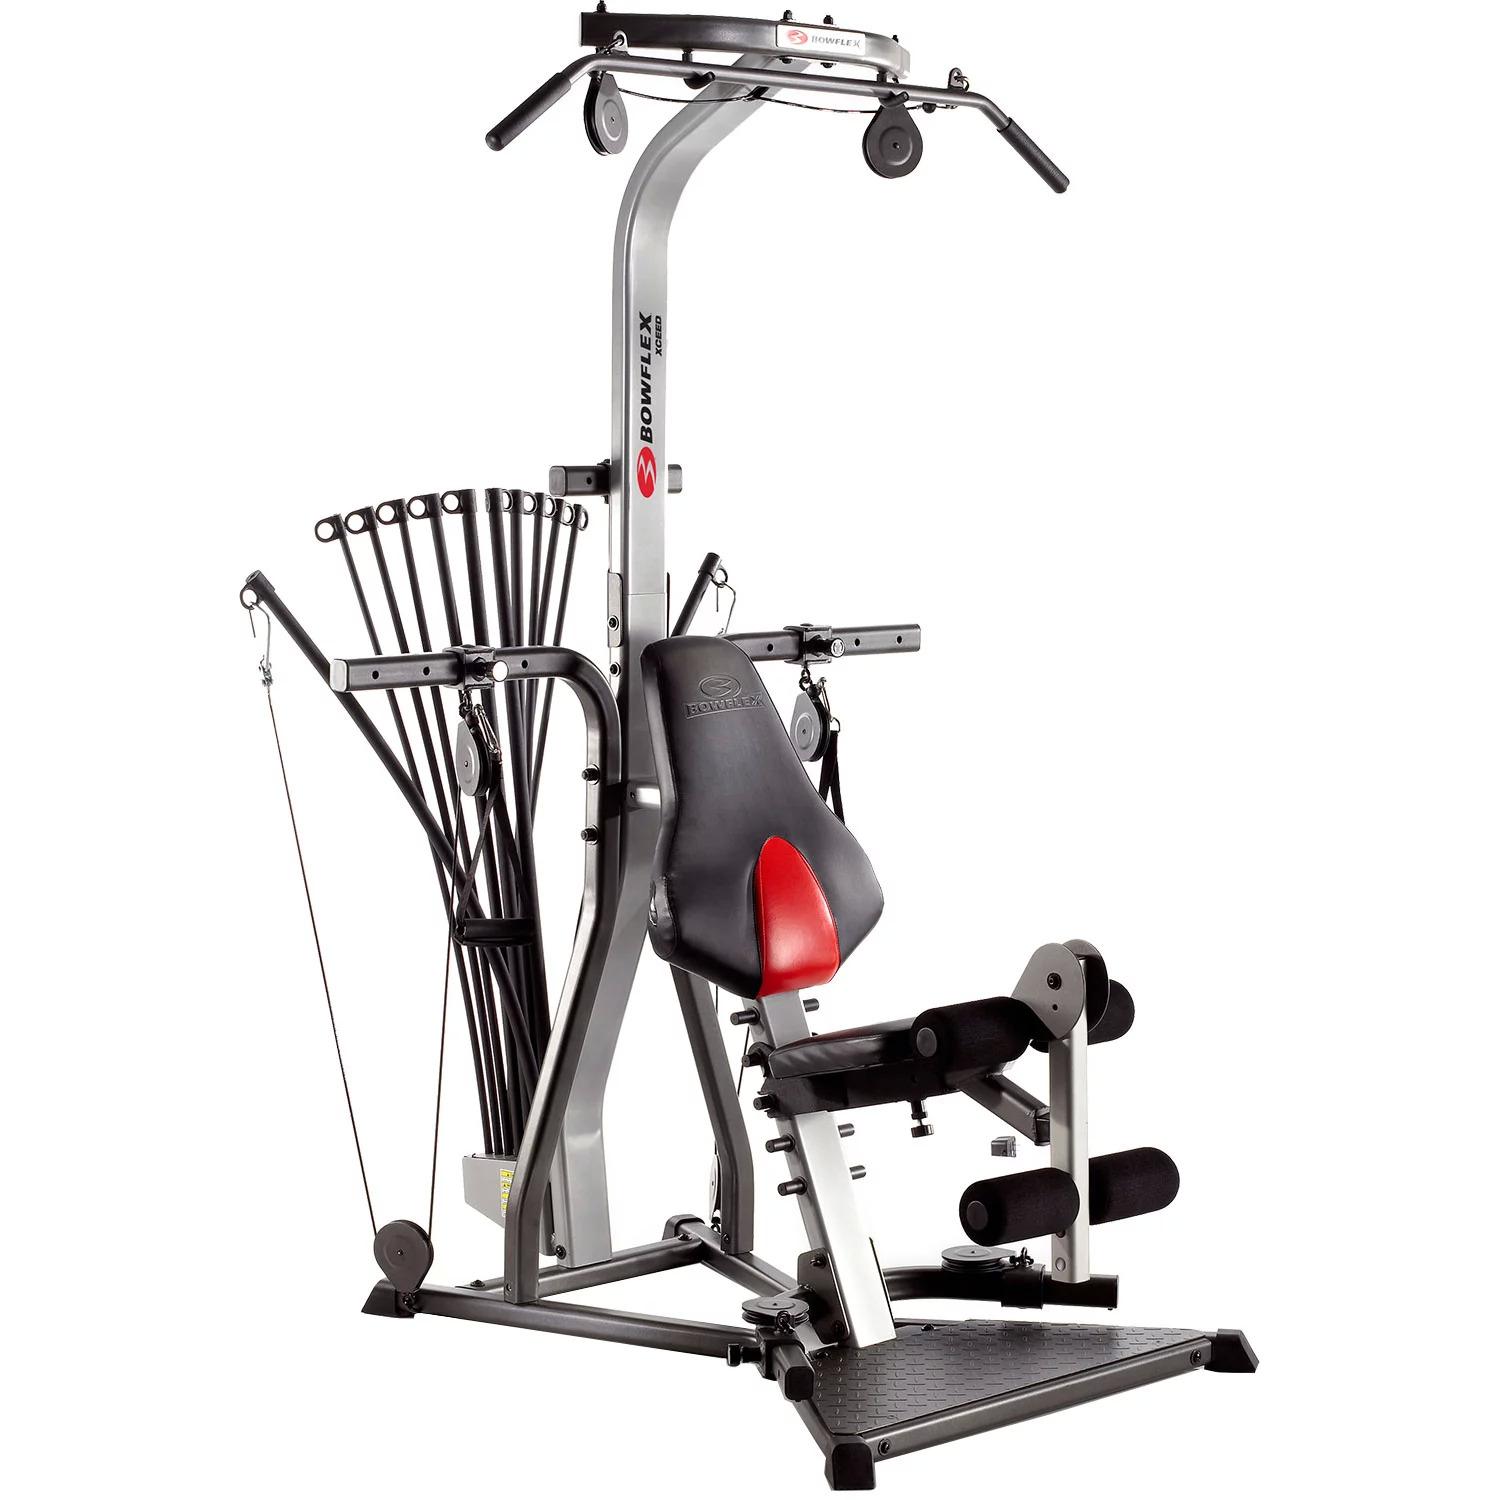 Bowflex Xceed Home Gym 100382 for $599.98